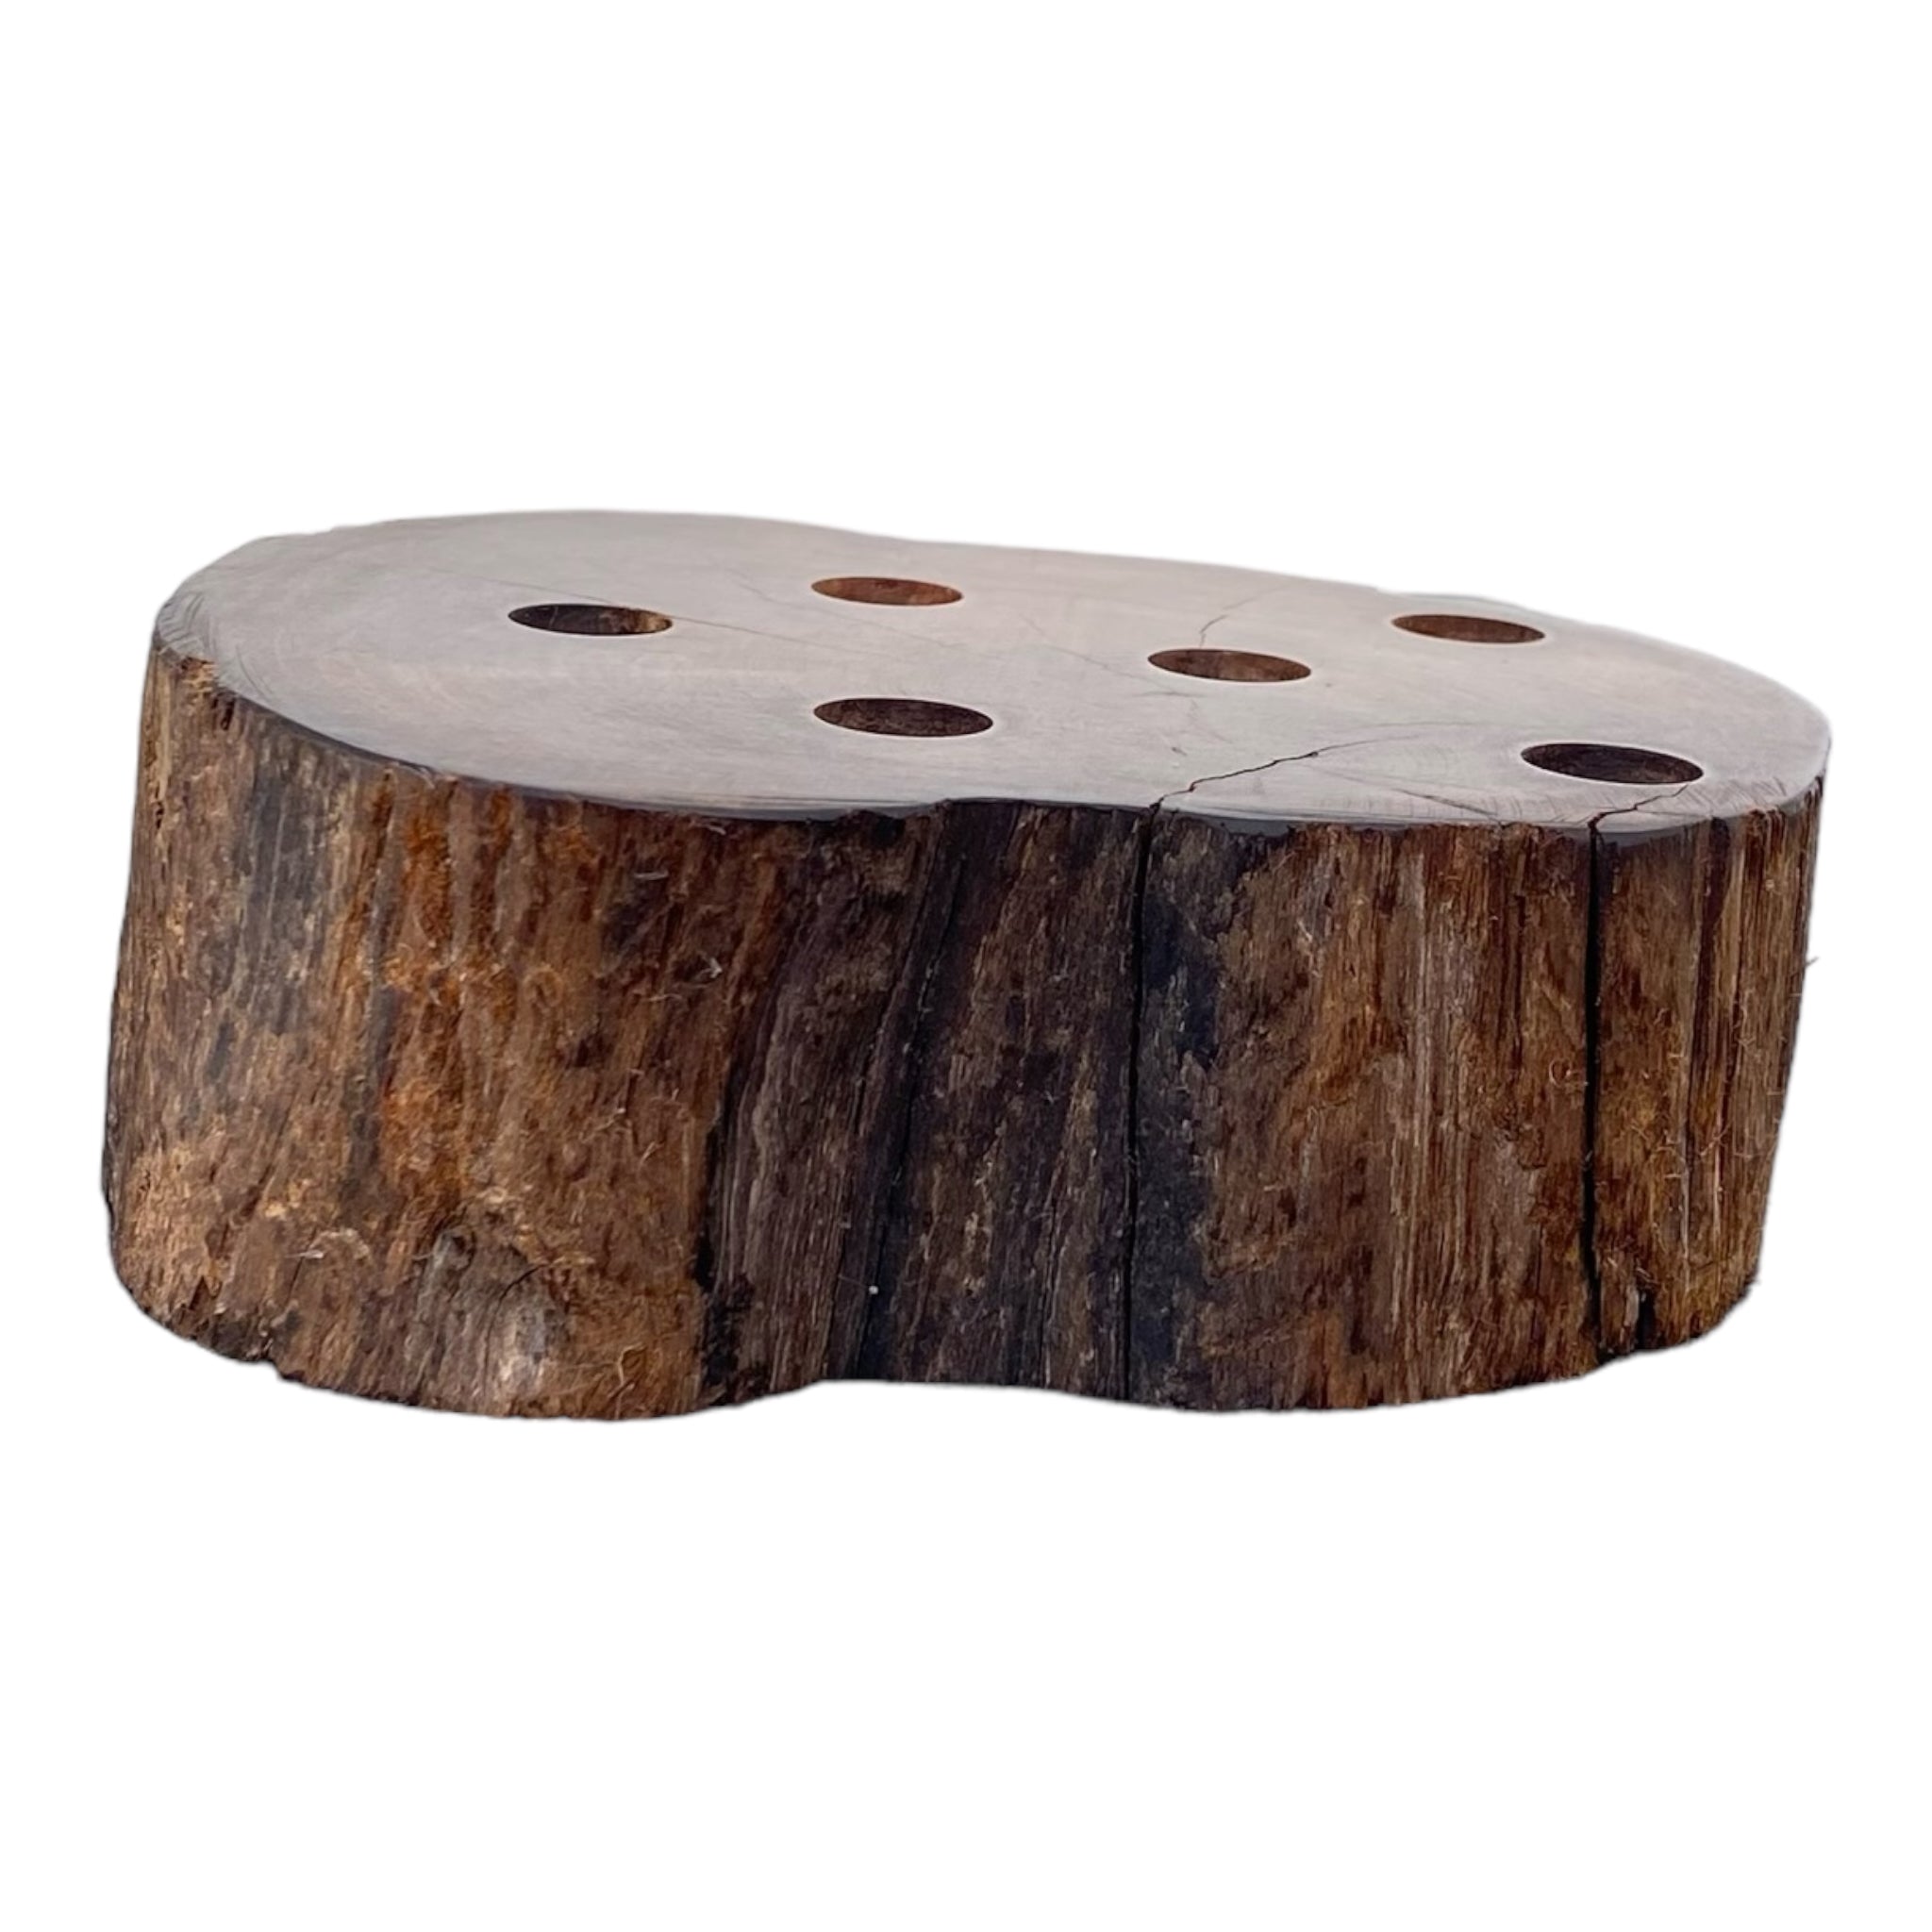 6 Hole Wood Display Stand Holder For 14mm Bong Bowl Pieces Or Quartz Bangers - Red Wood Burl With Live Edge